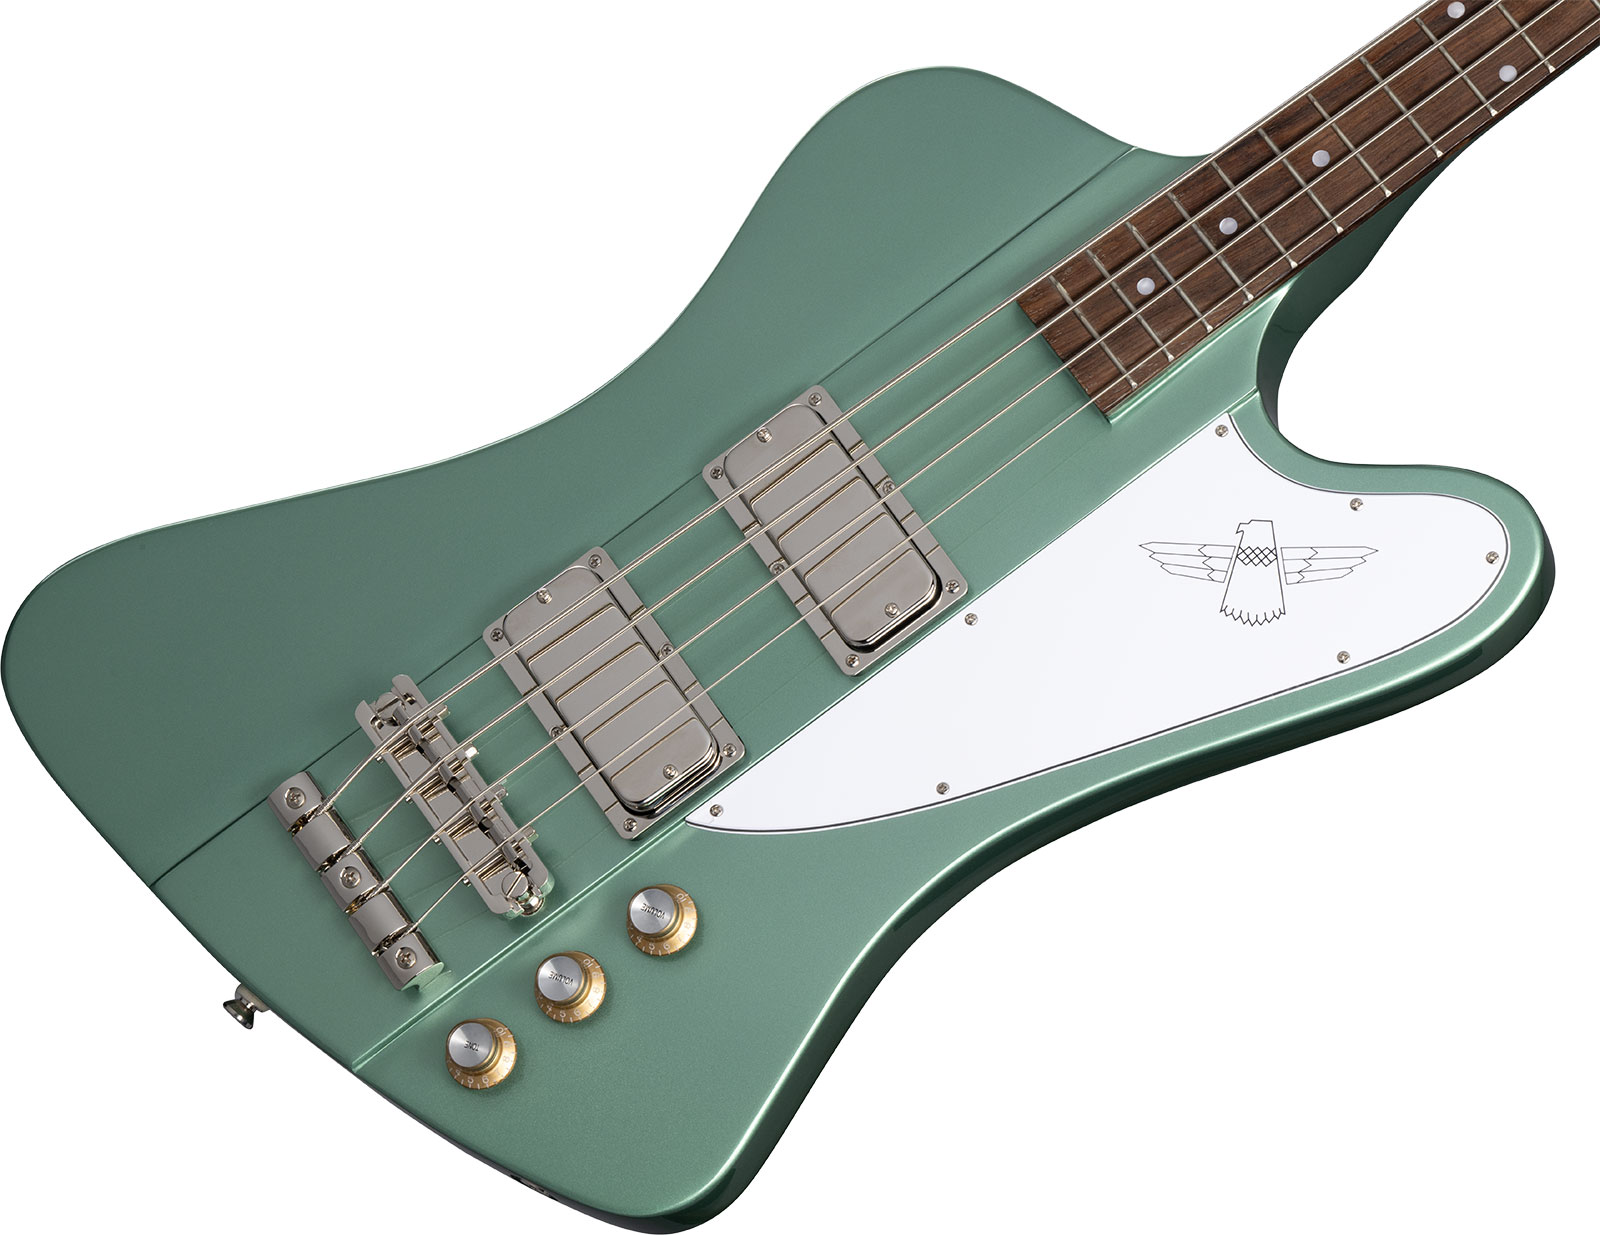 Epiphone Thunderbird 1964 Original Lau - Inverness Green - Solid body electric bass - Variation 3